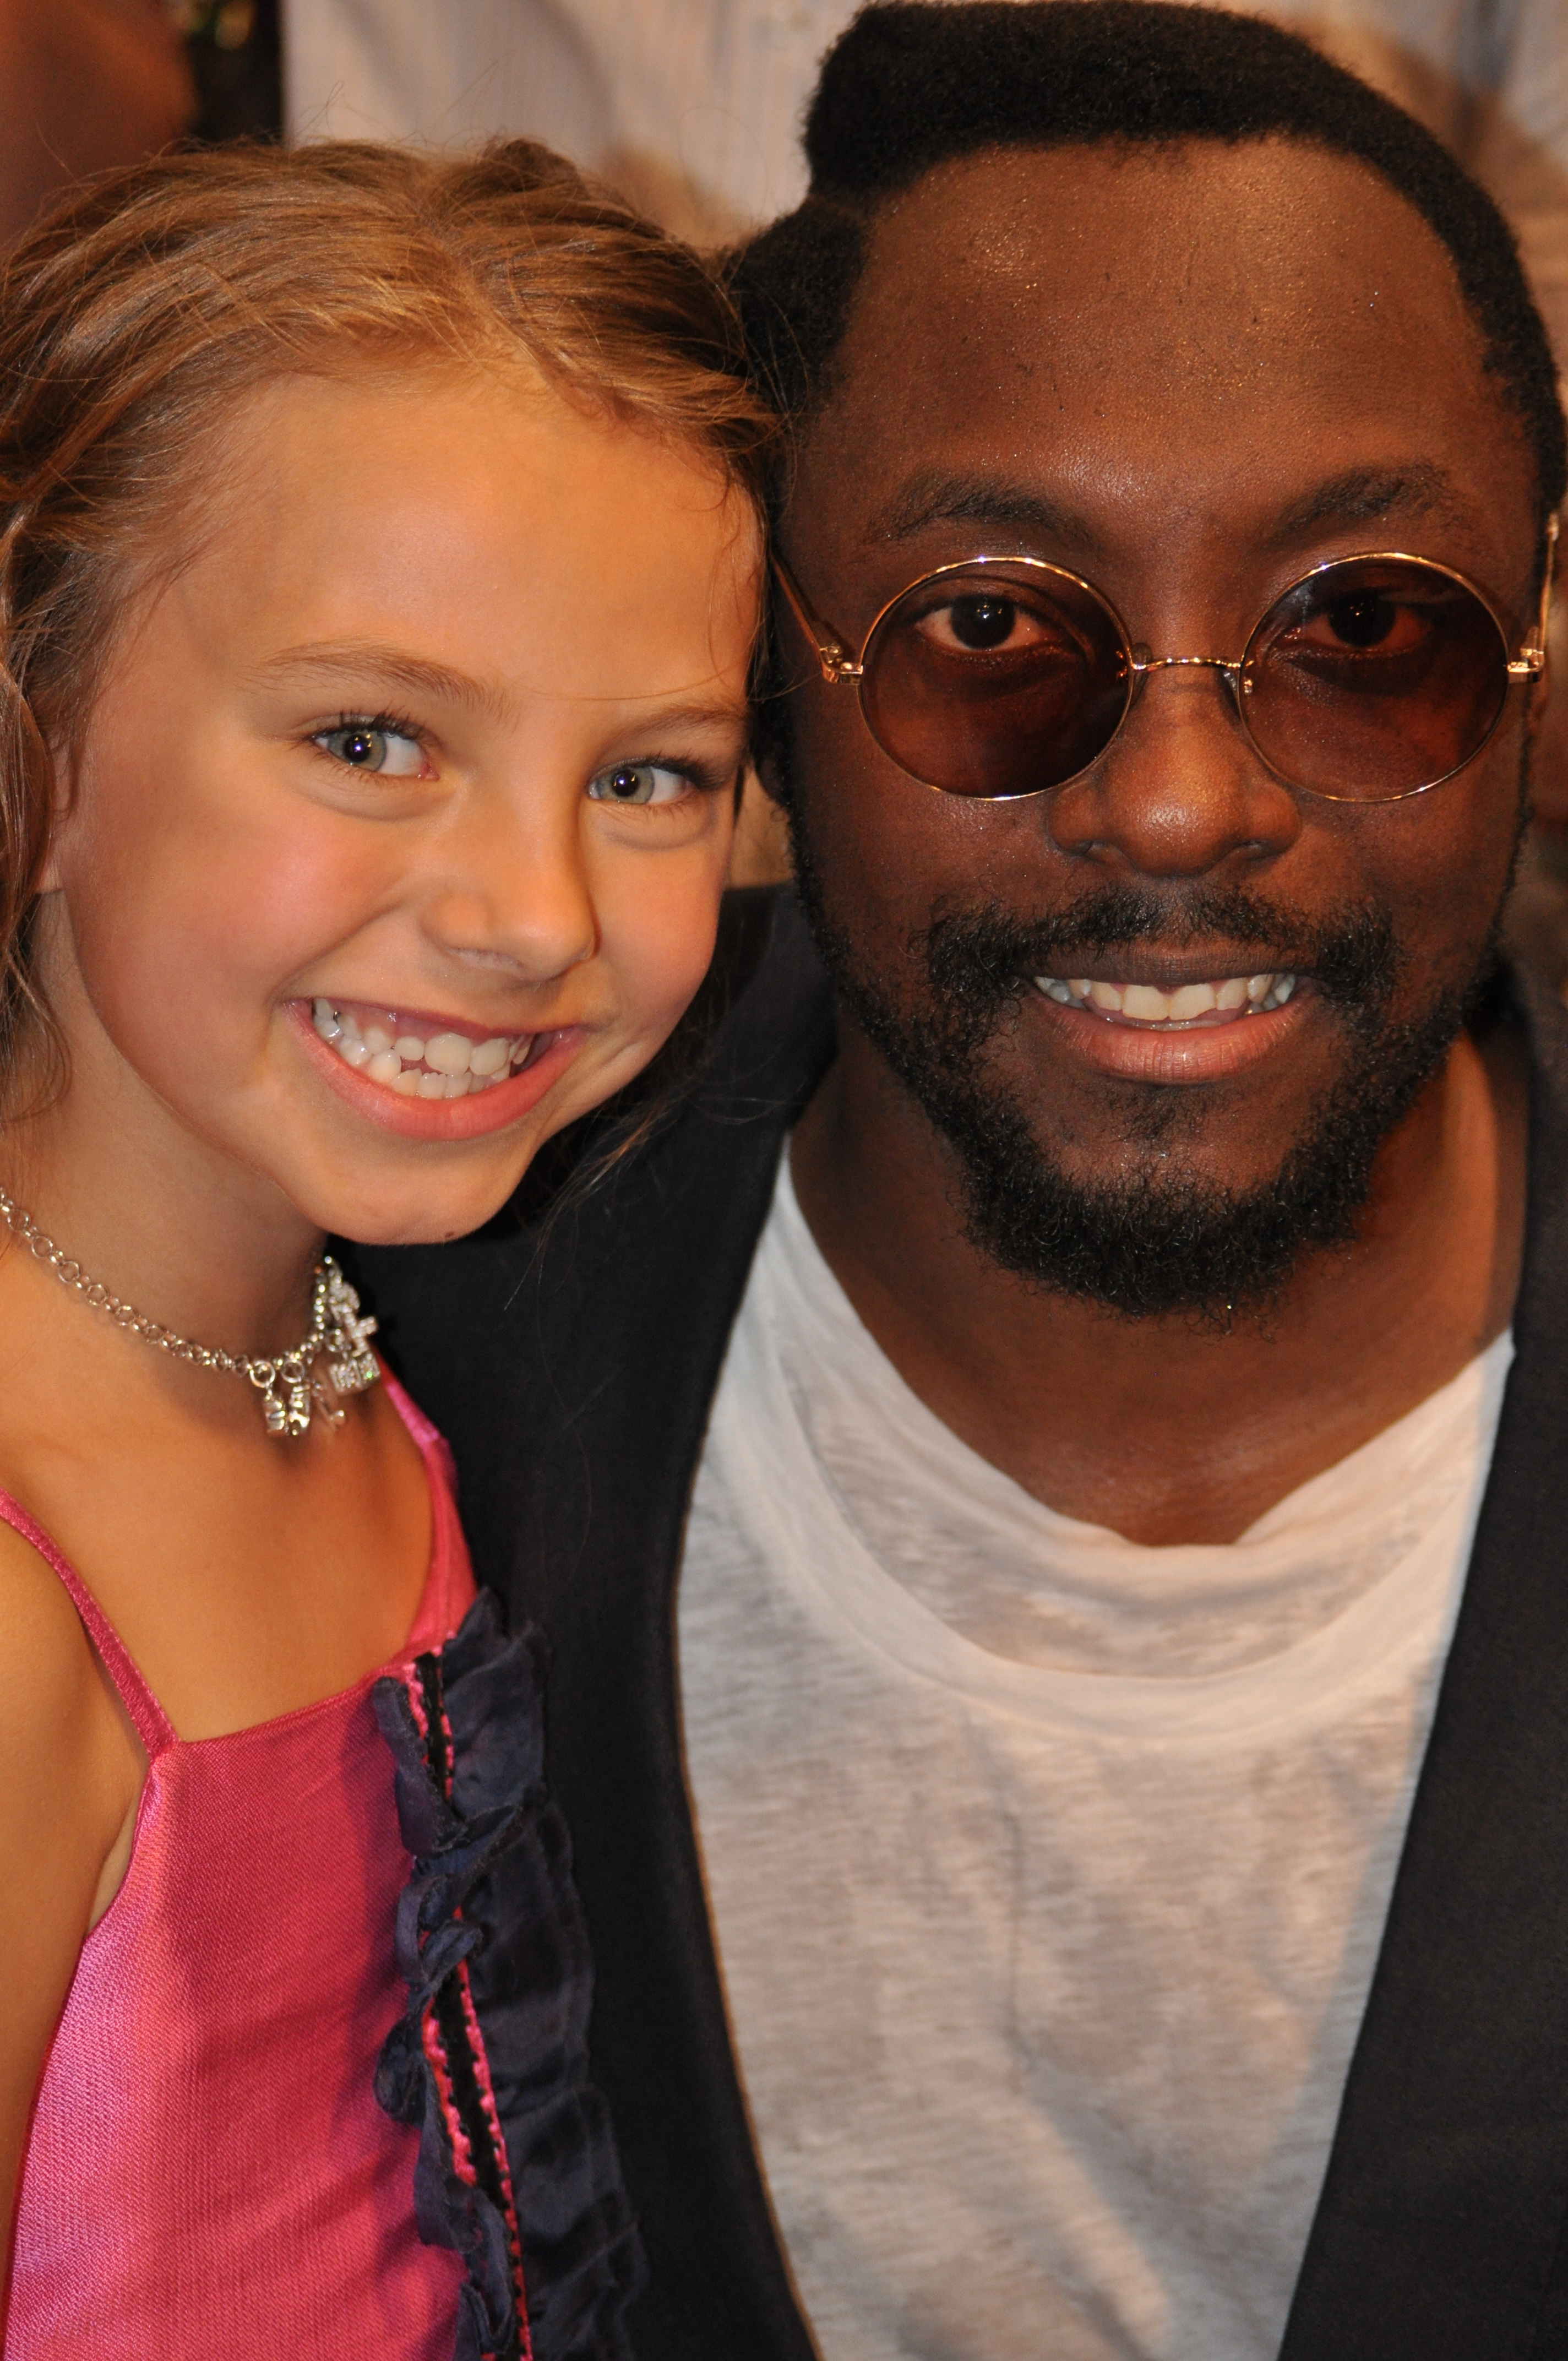 Caitlin Carmichael and will.i.am of The Black Eyed Peas at the Rob Dyrdek Foundation VIP Benefit 2011